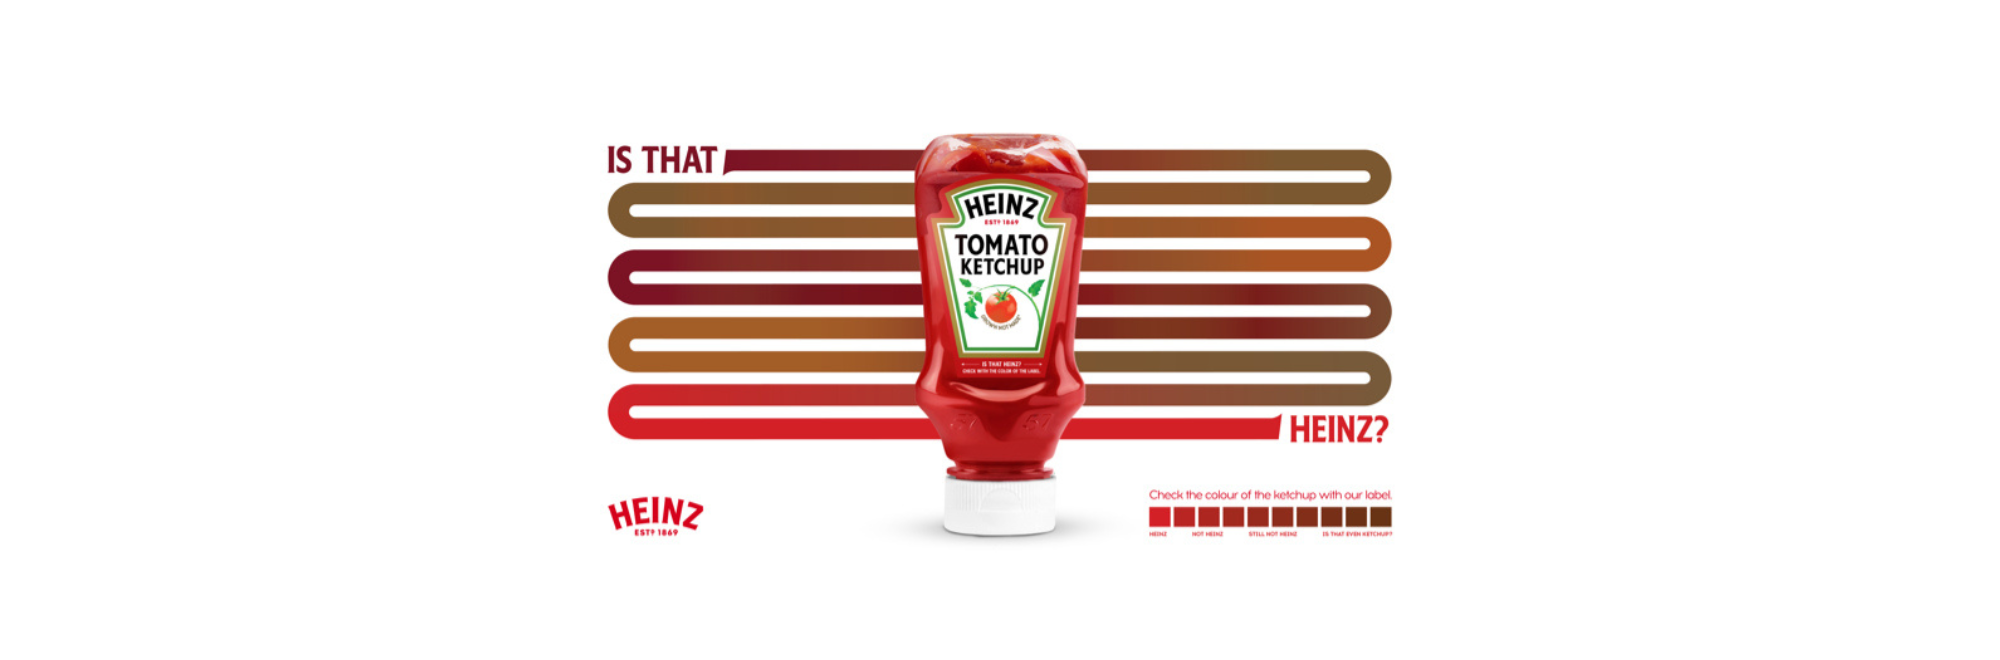 Heinz creates label with the exact pantone reference of tomato ketchup to fight ketchup fraud